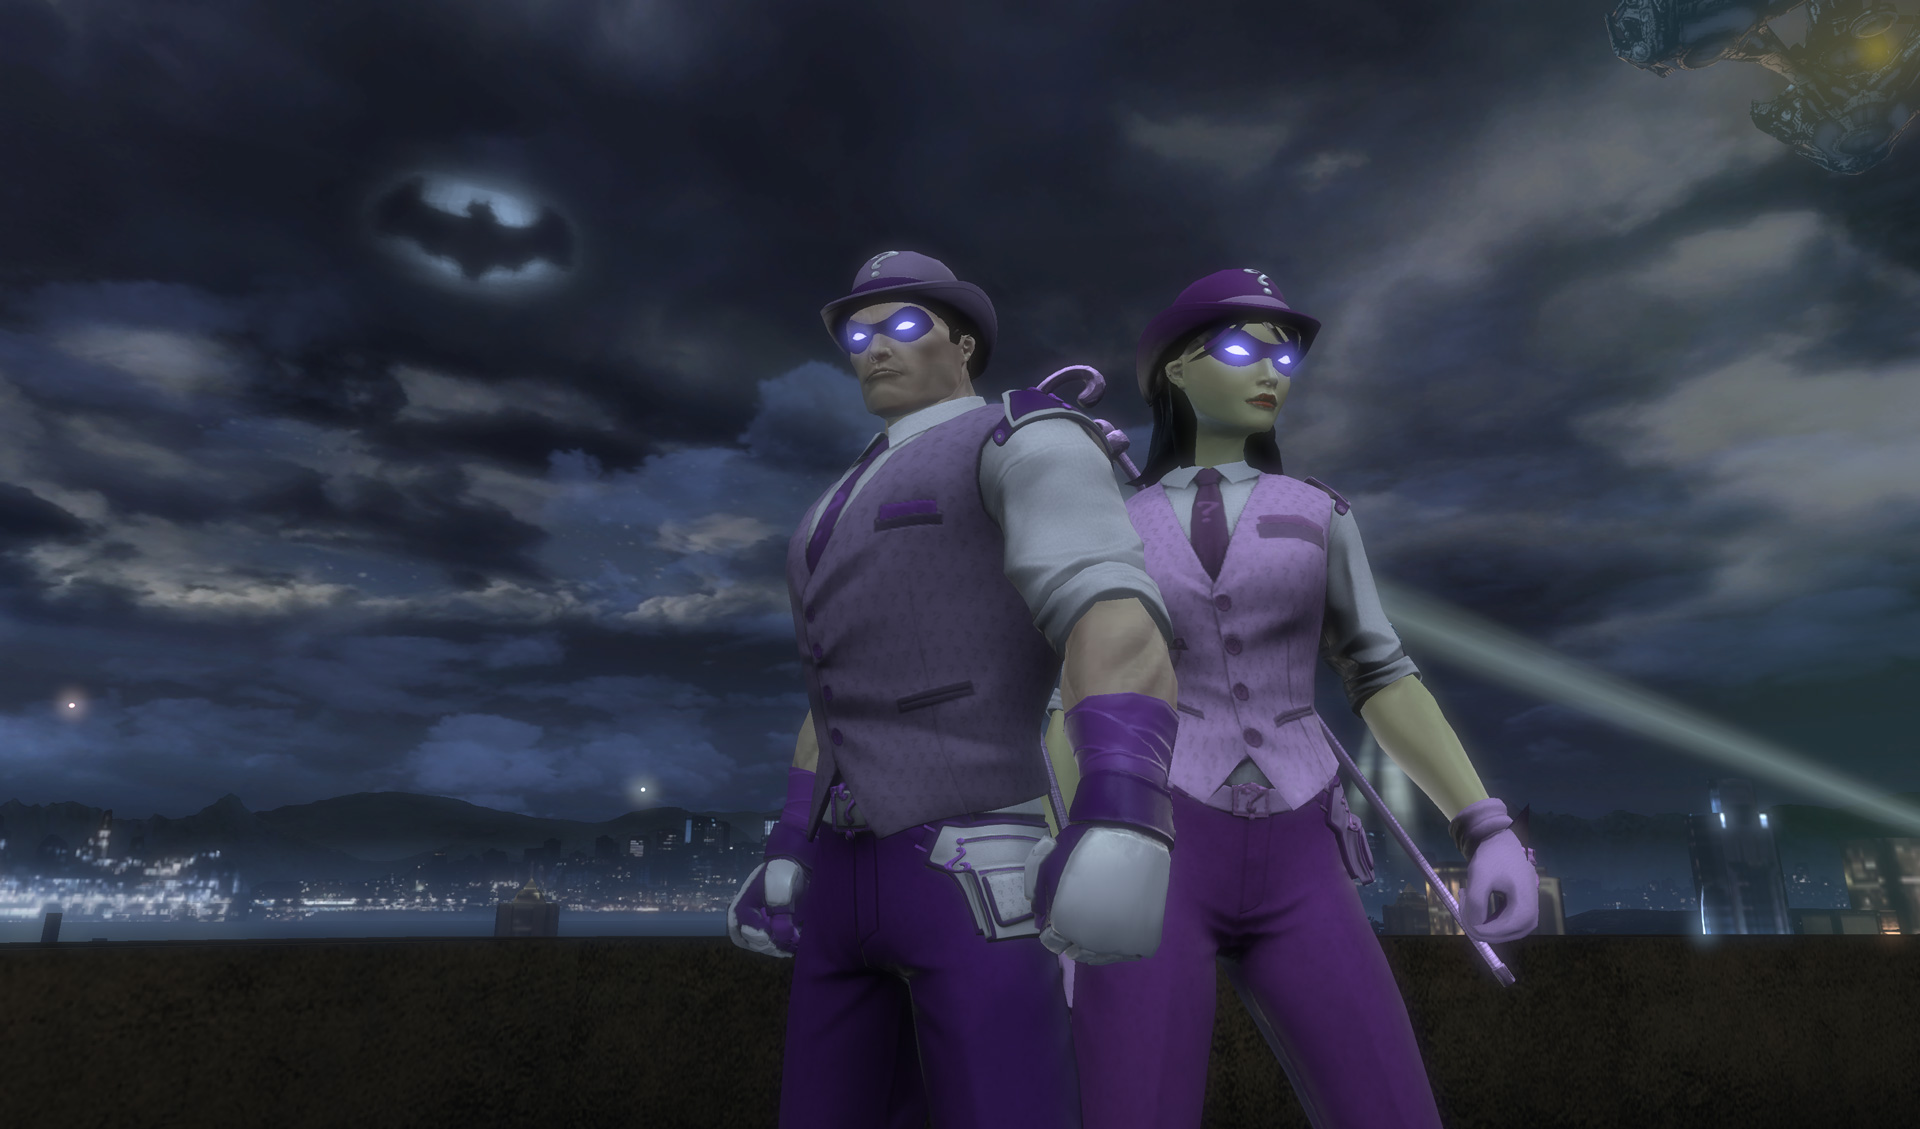 DC Universe Online Now Features Cross-Play on PS4, PS3